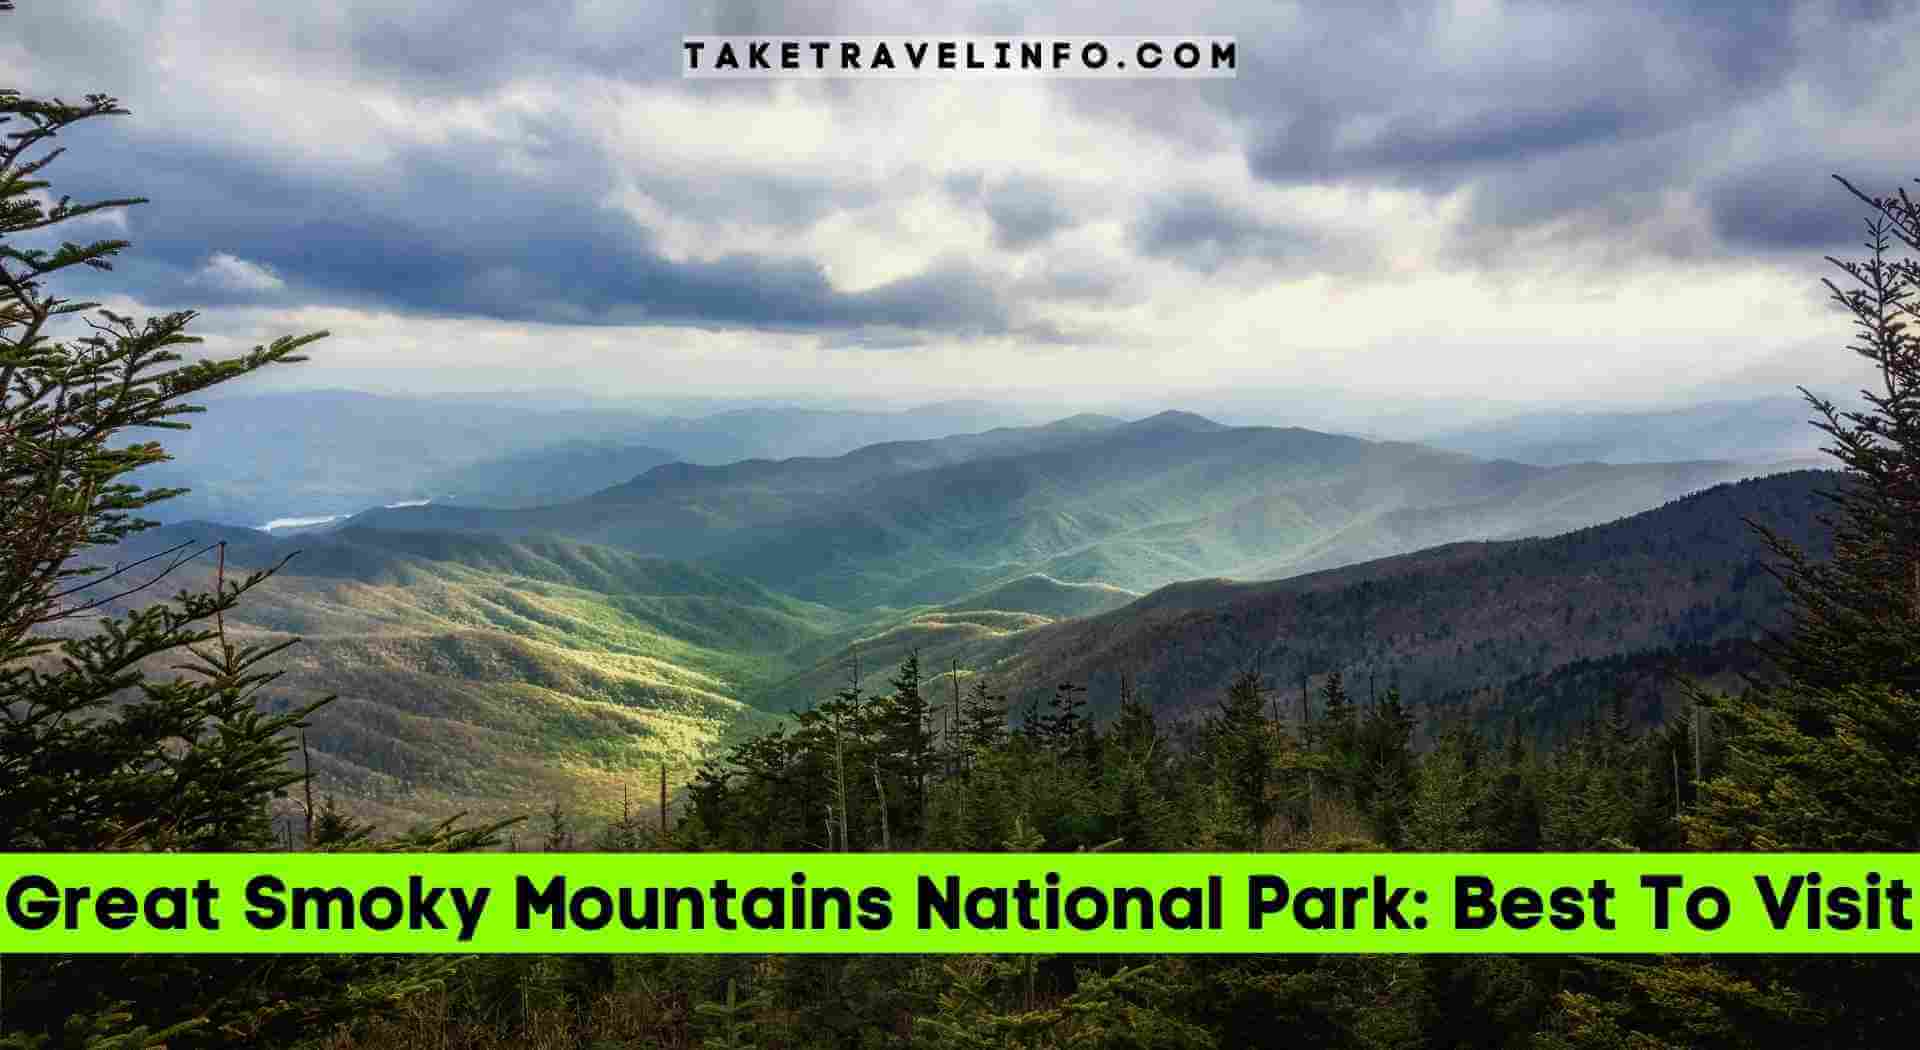 Great Smoky Mountains National Park: Best To Visit